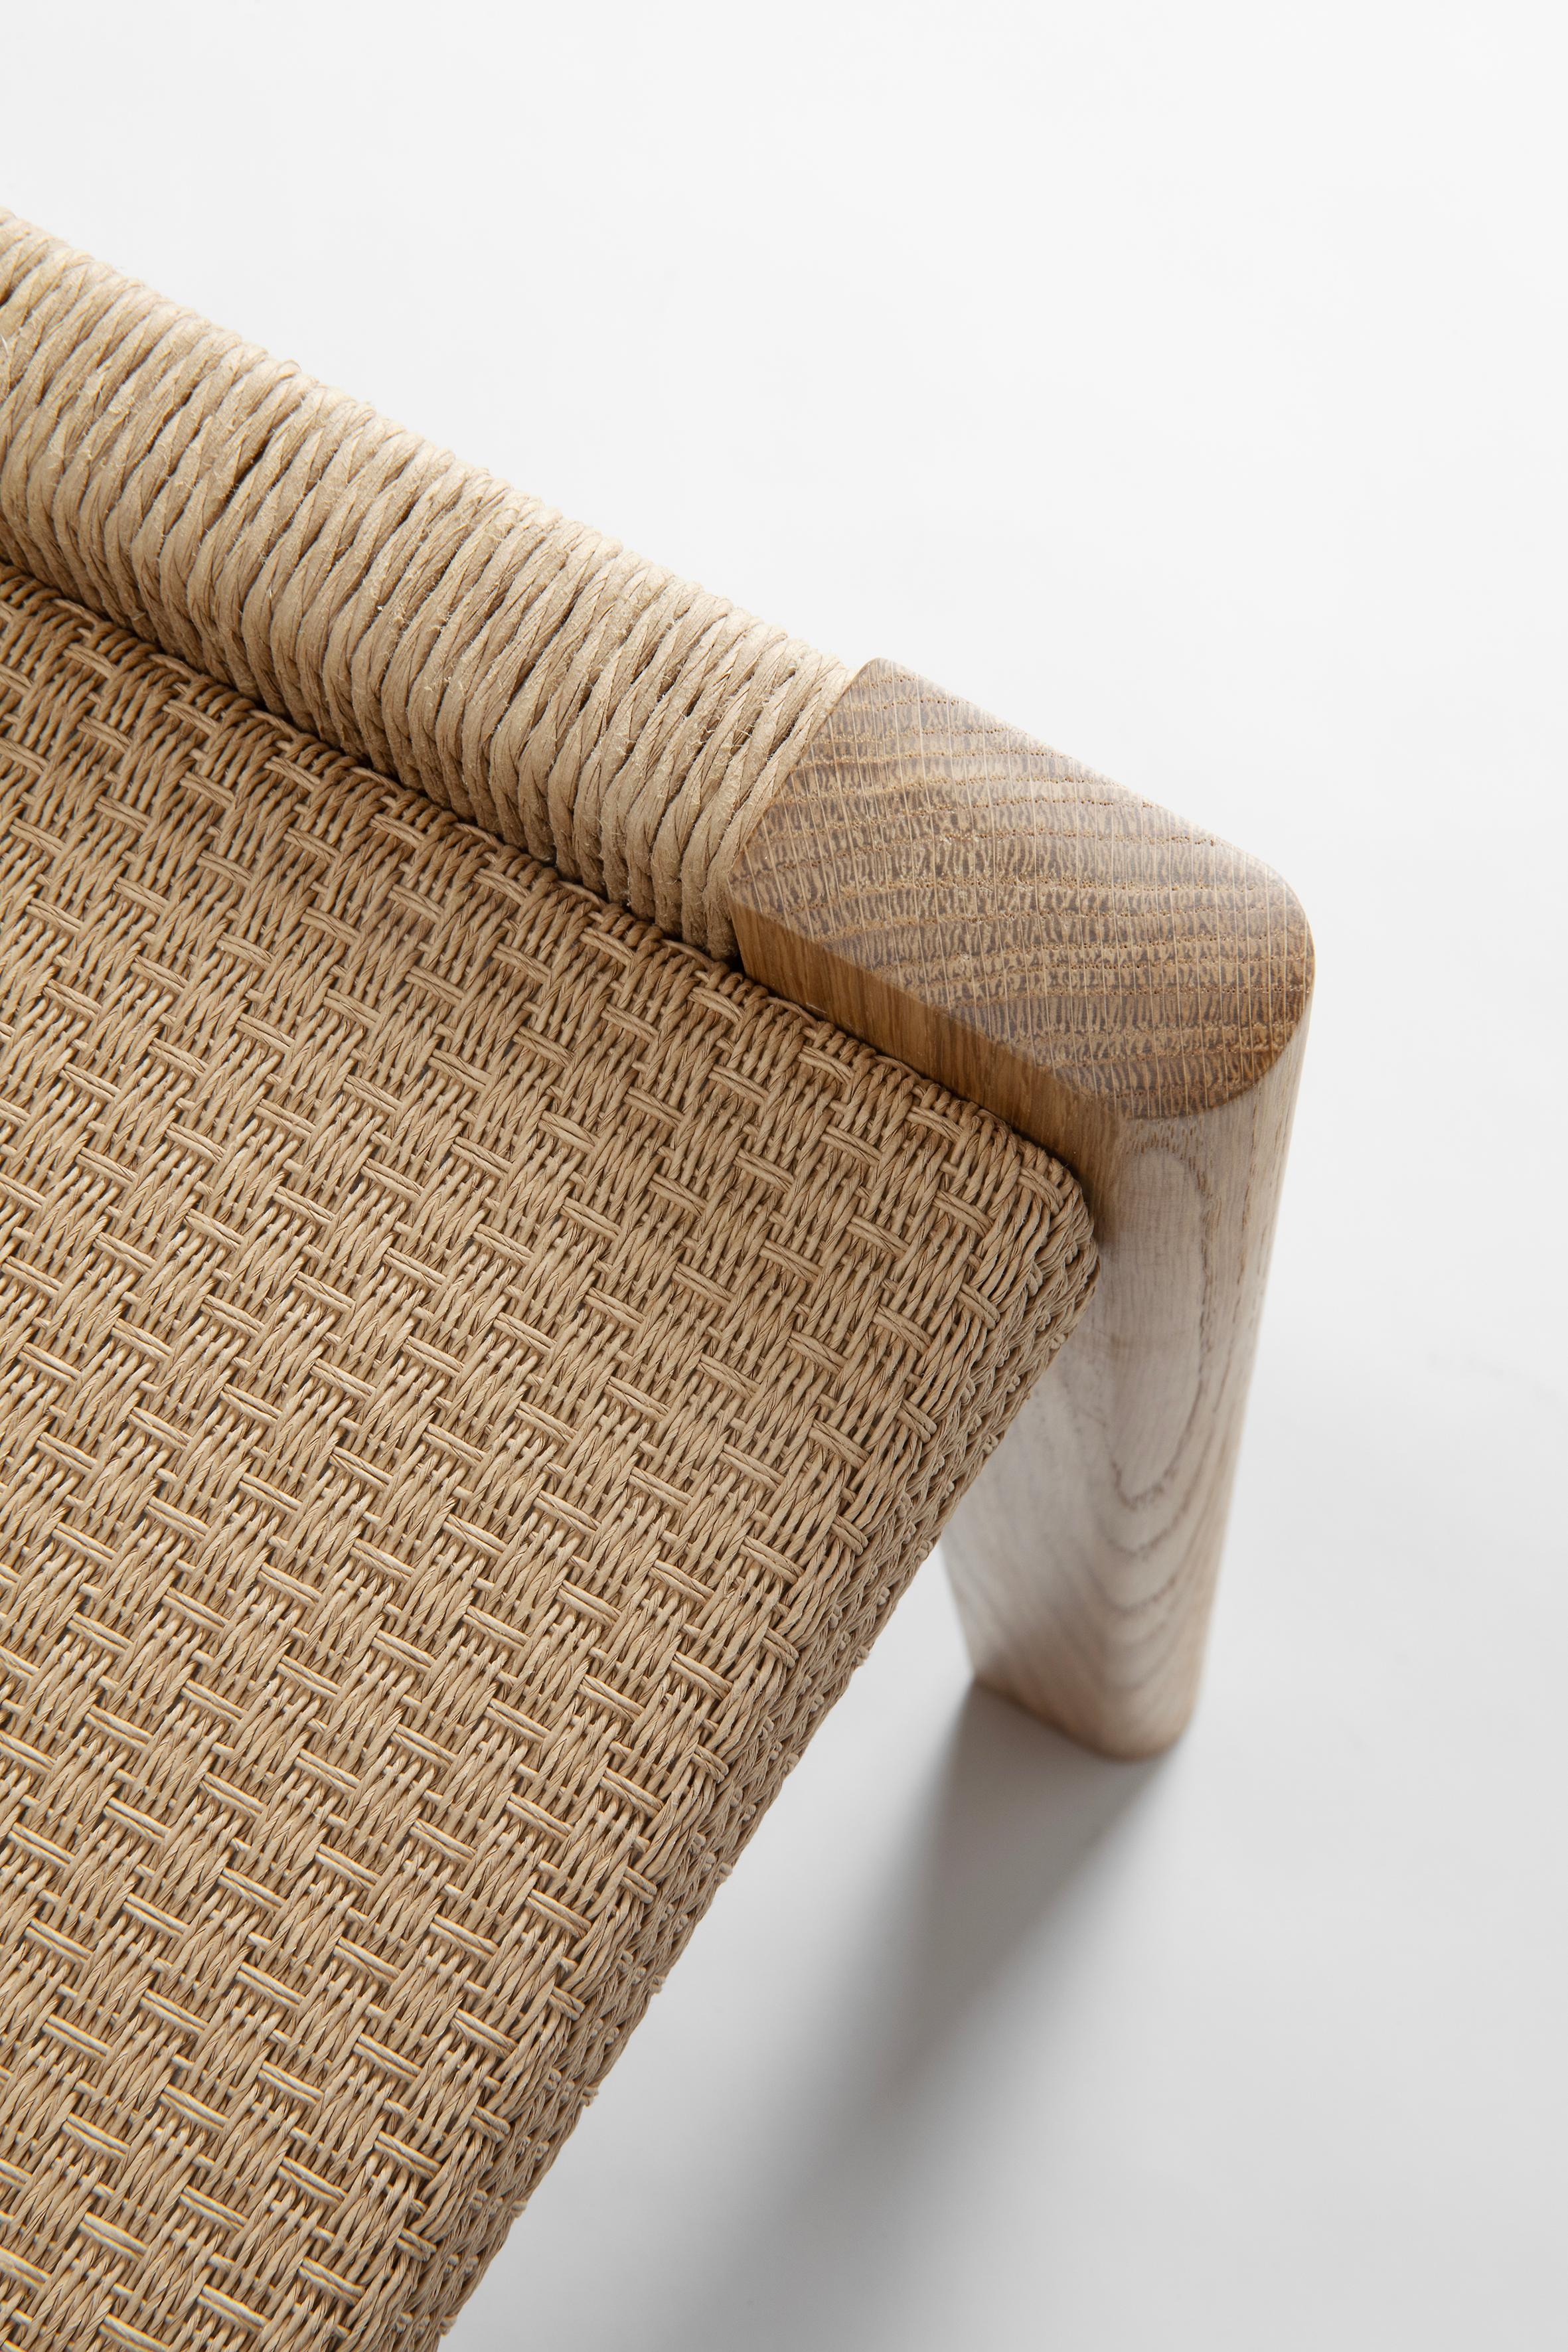 Detalji (“detail” in Finnish) bench (designed 2021) is made following the traditional Nikari craftsmanship solutions, accompanied with delicate Woodnotes paper yarn fabric “Woodpecker”, designed by Ritva Puotila. Paper yarn is also used separately